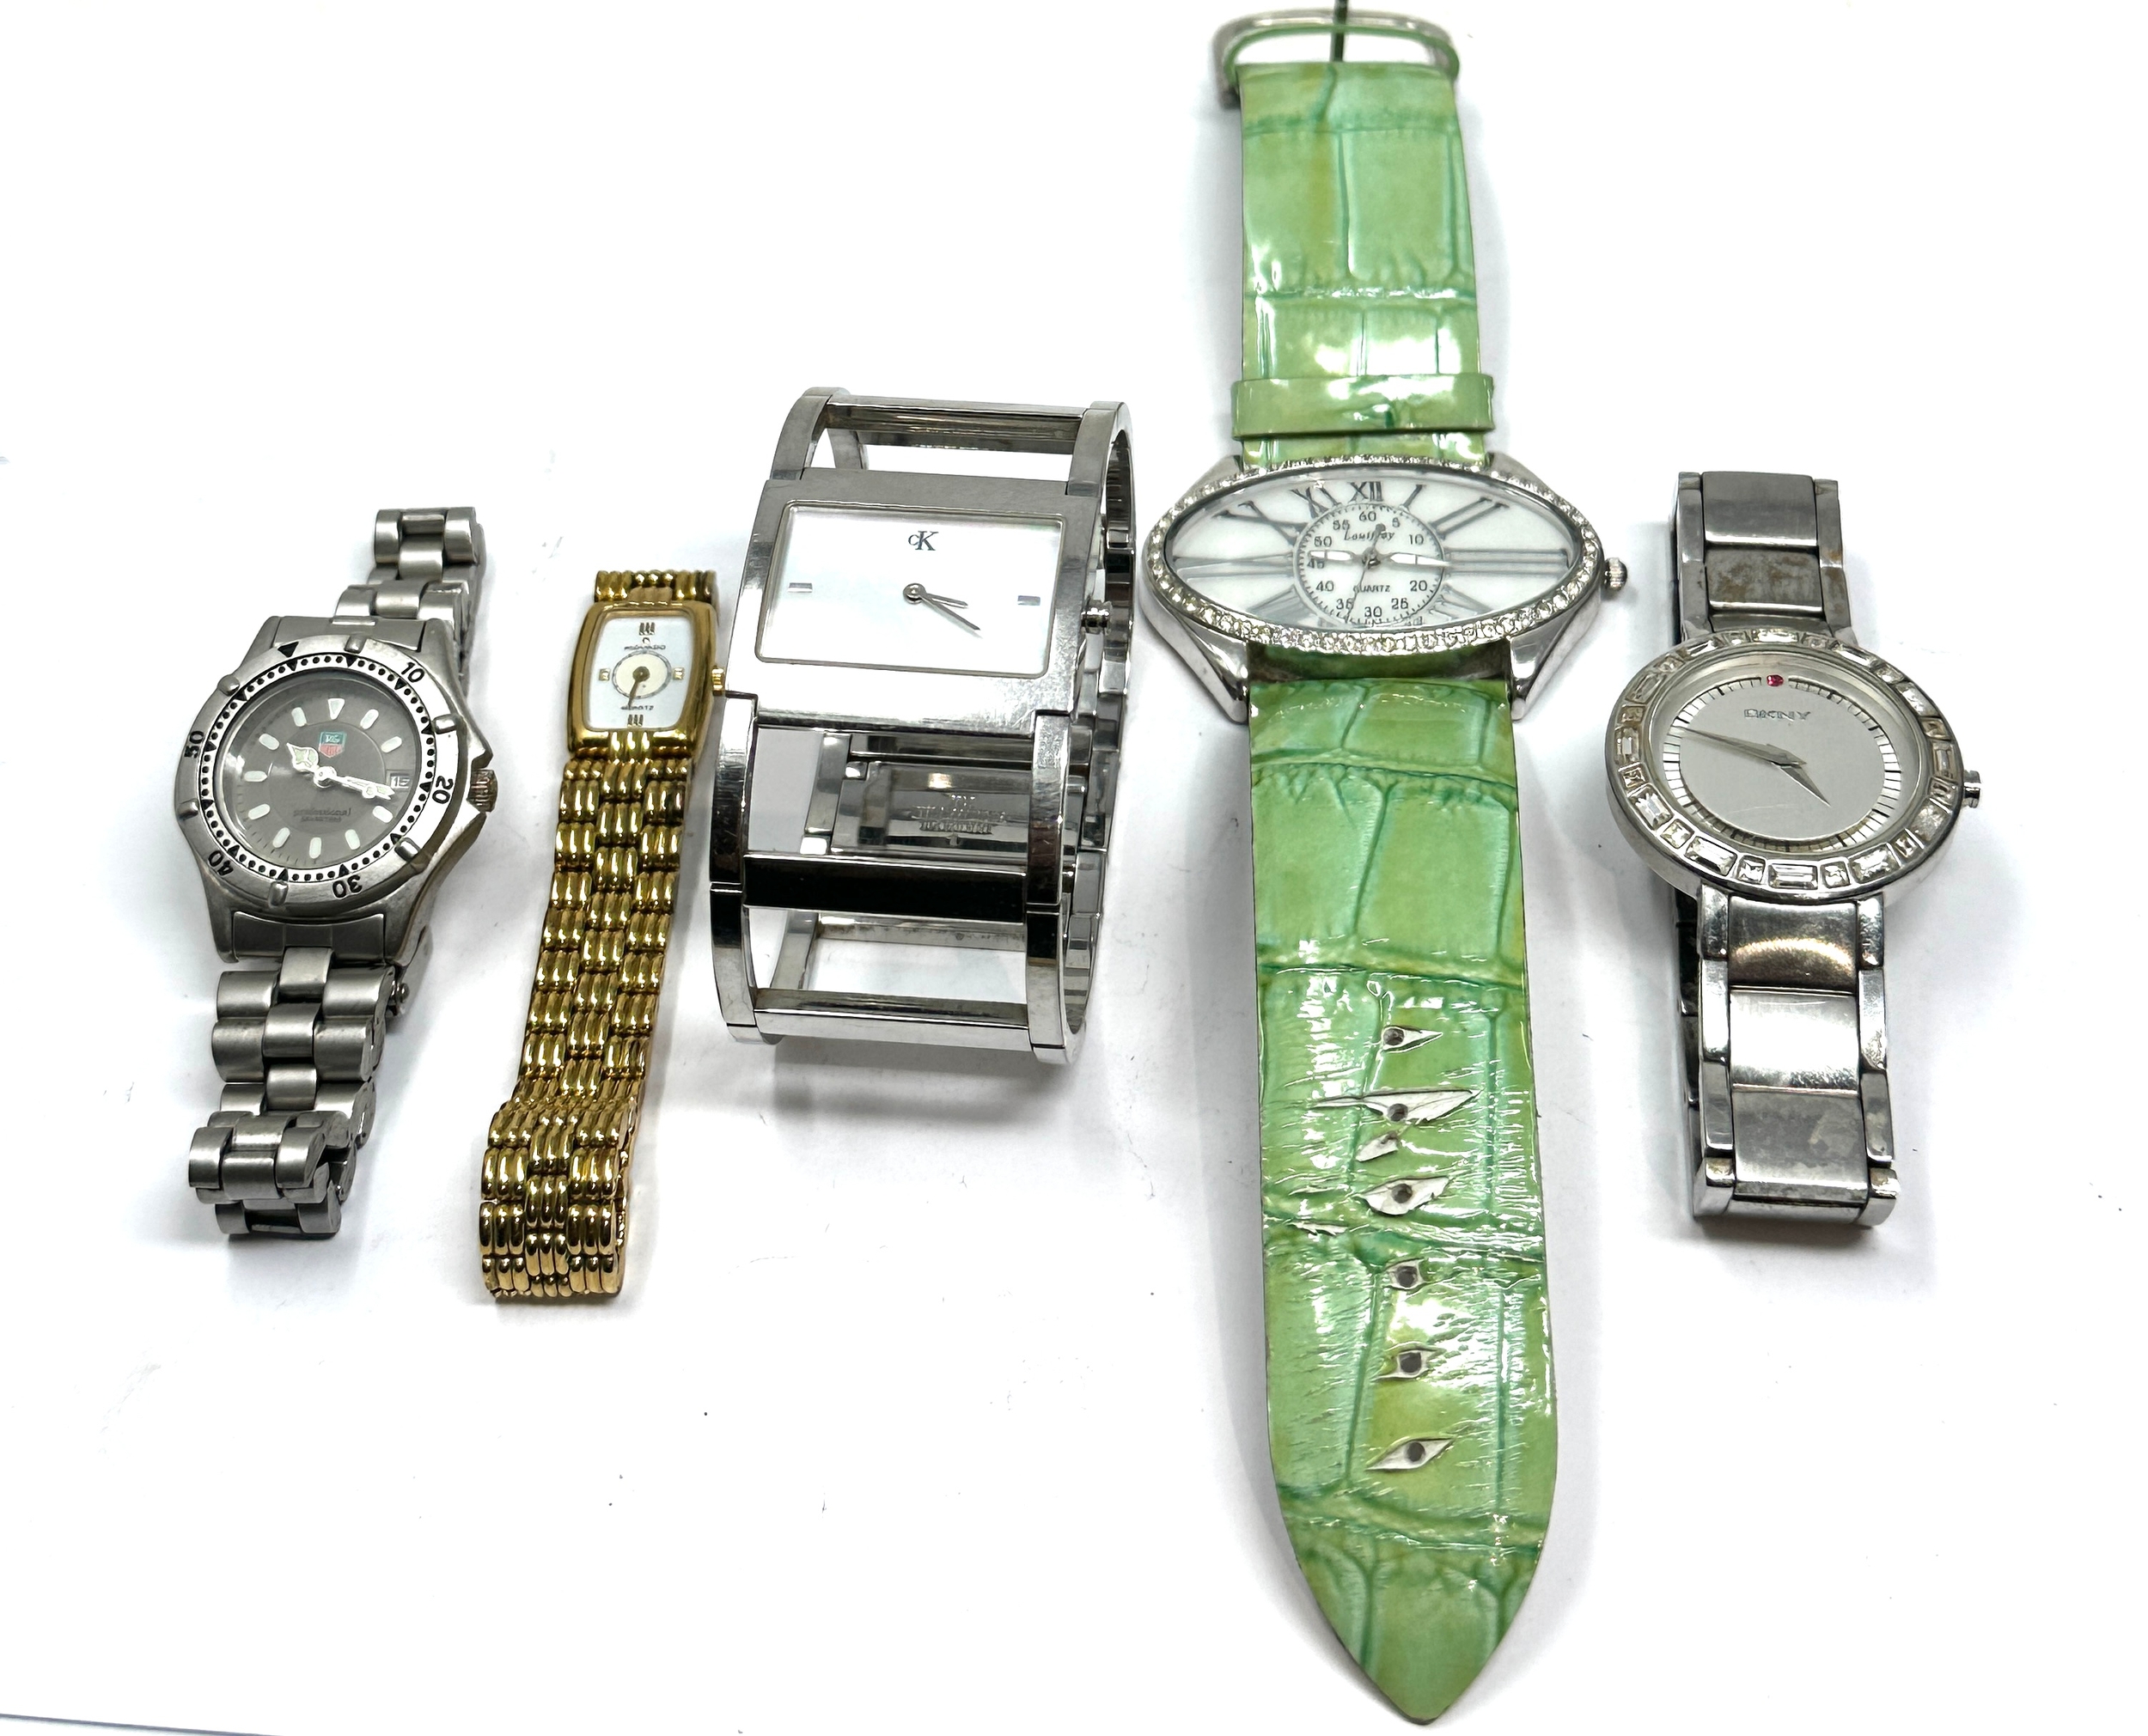 5 ladies wristwatches quartz includes calvin klein tag heuer dkny movado etc possibly need new